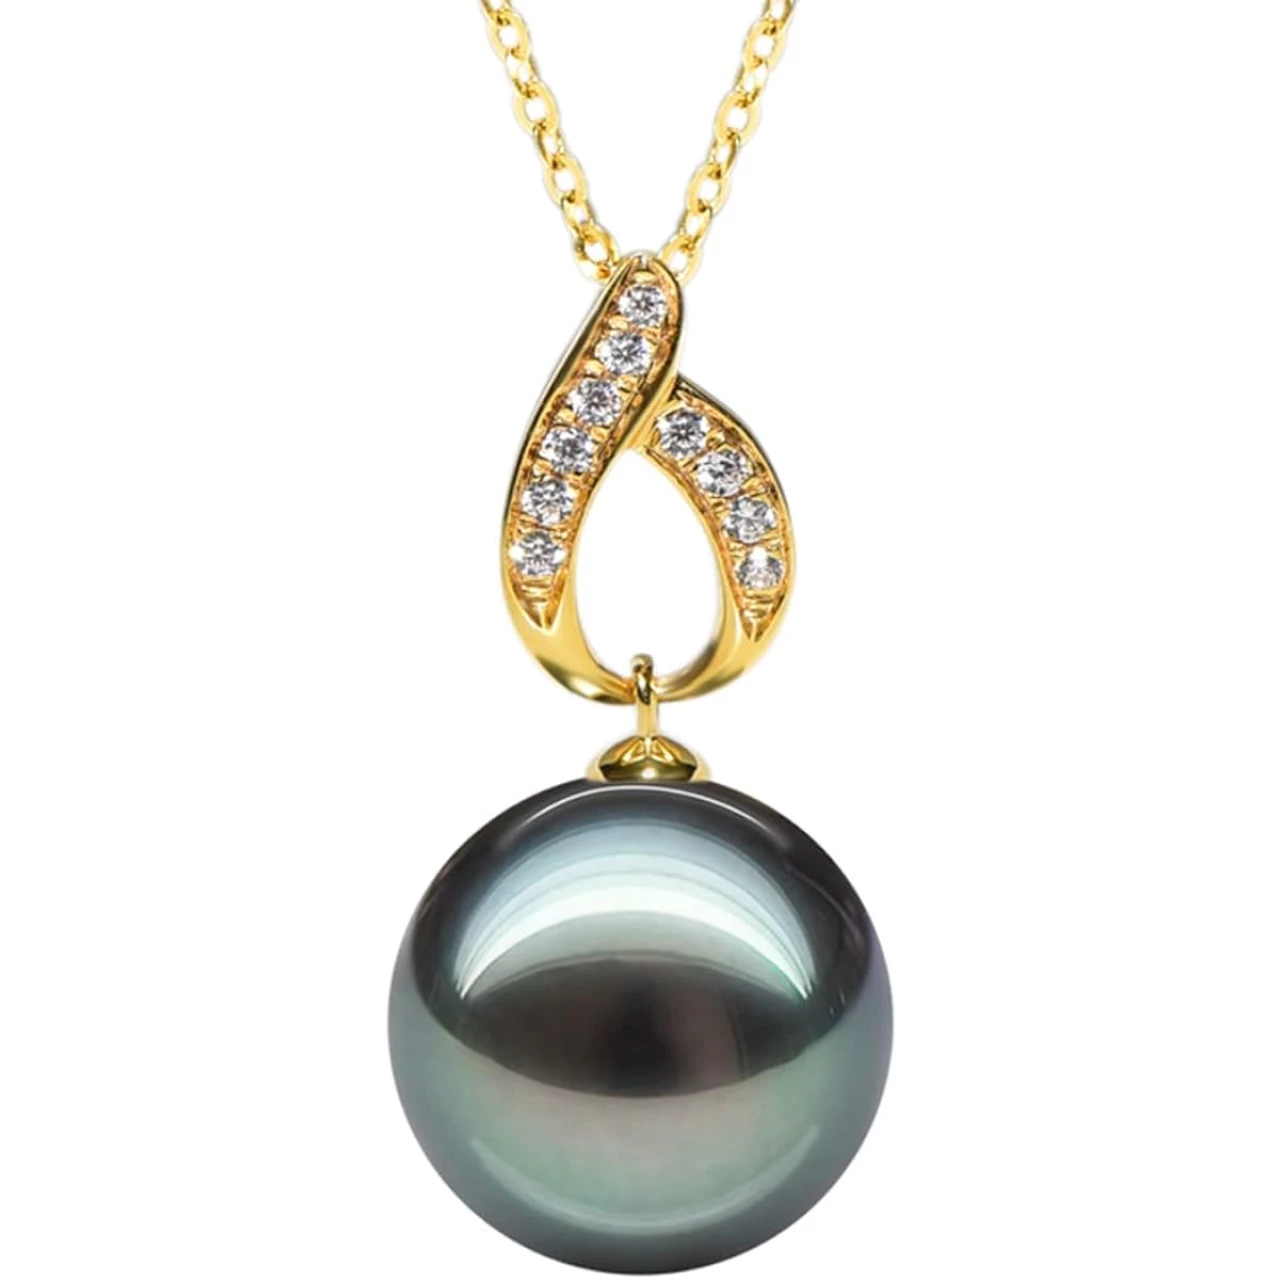 Nonnyl 18K Gold Tahitian Black Pearl Necklaces for Women Fine Jewellery Round AAAA+ 10mm Pearls- Pearl Pendant Necklace Gift for Women Her Grandma Wife